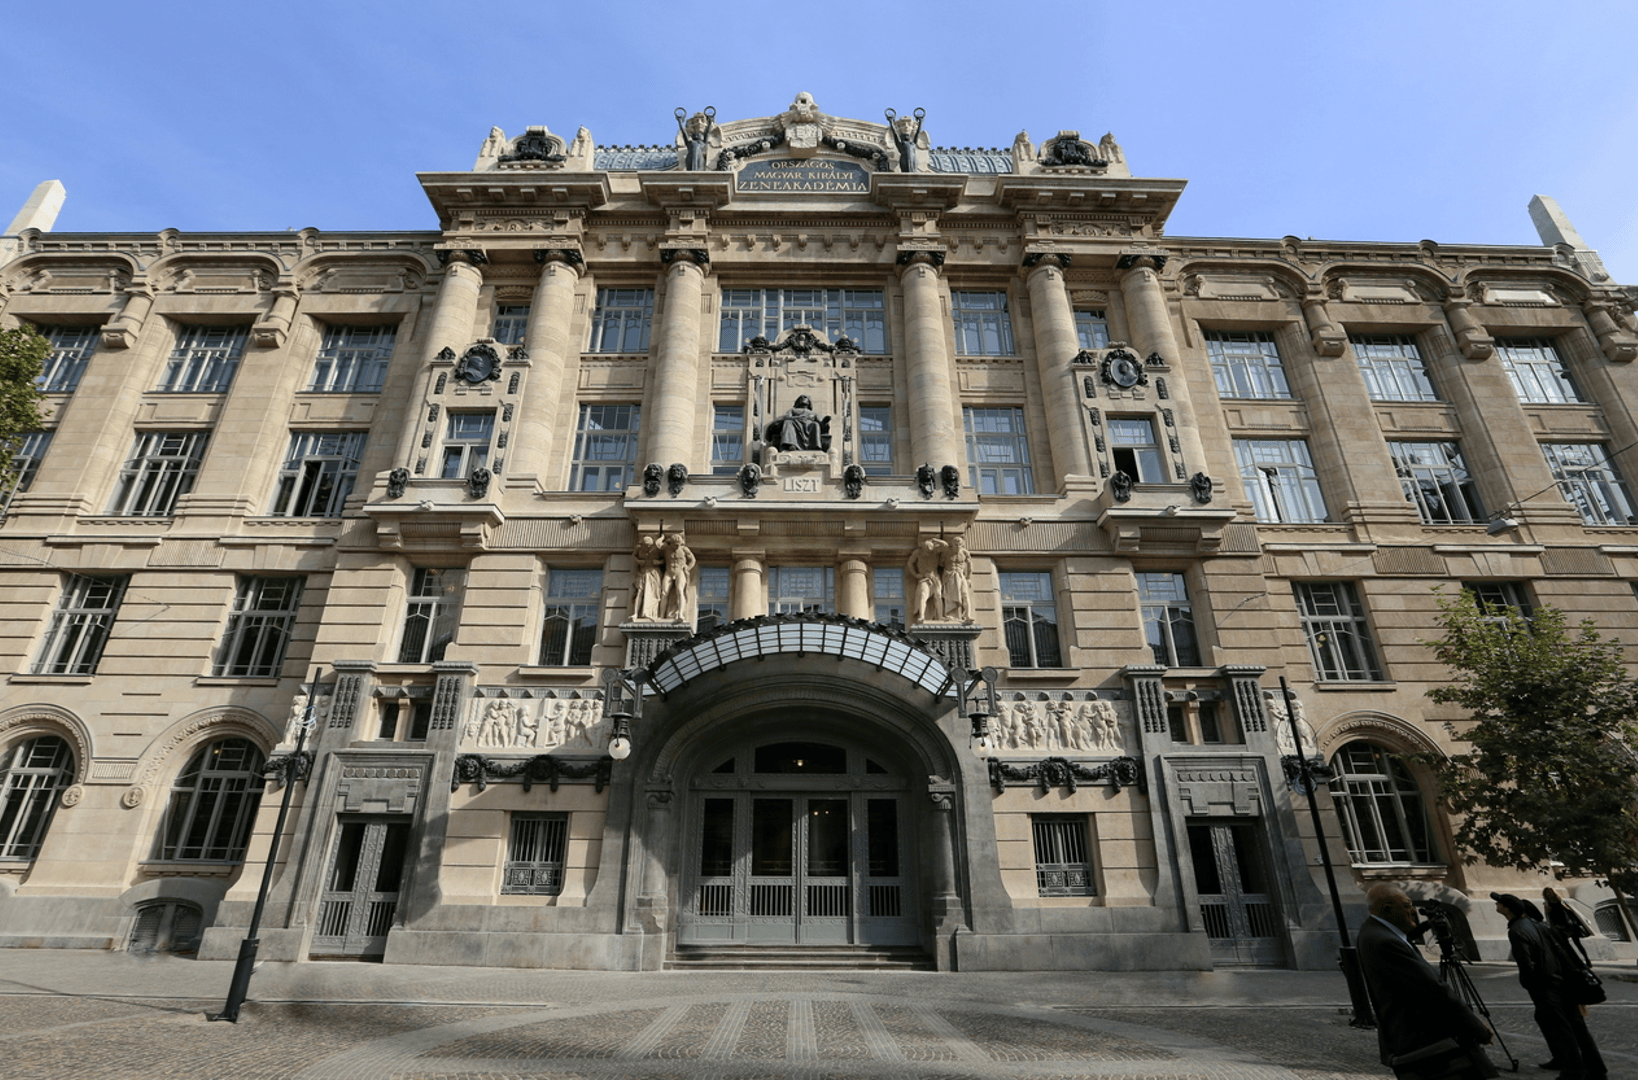 The main building of Liszt Ferenc Academy of Music